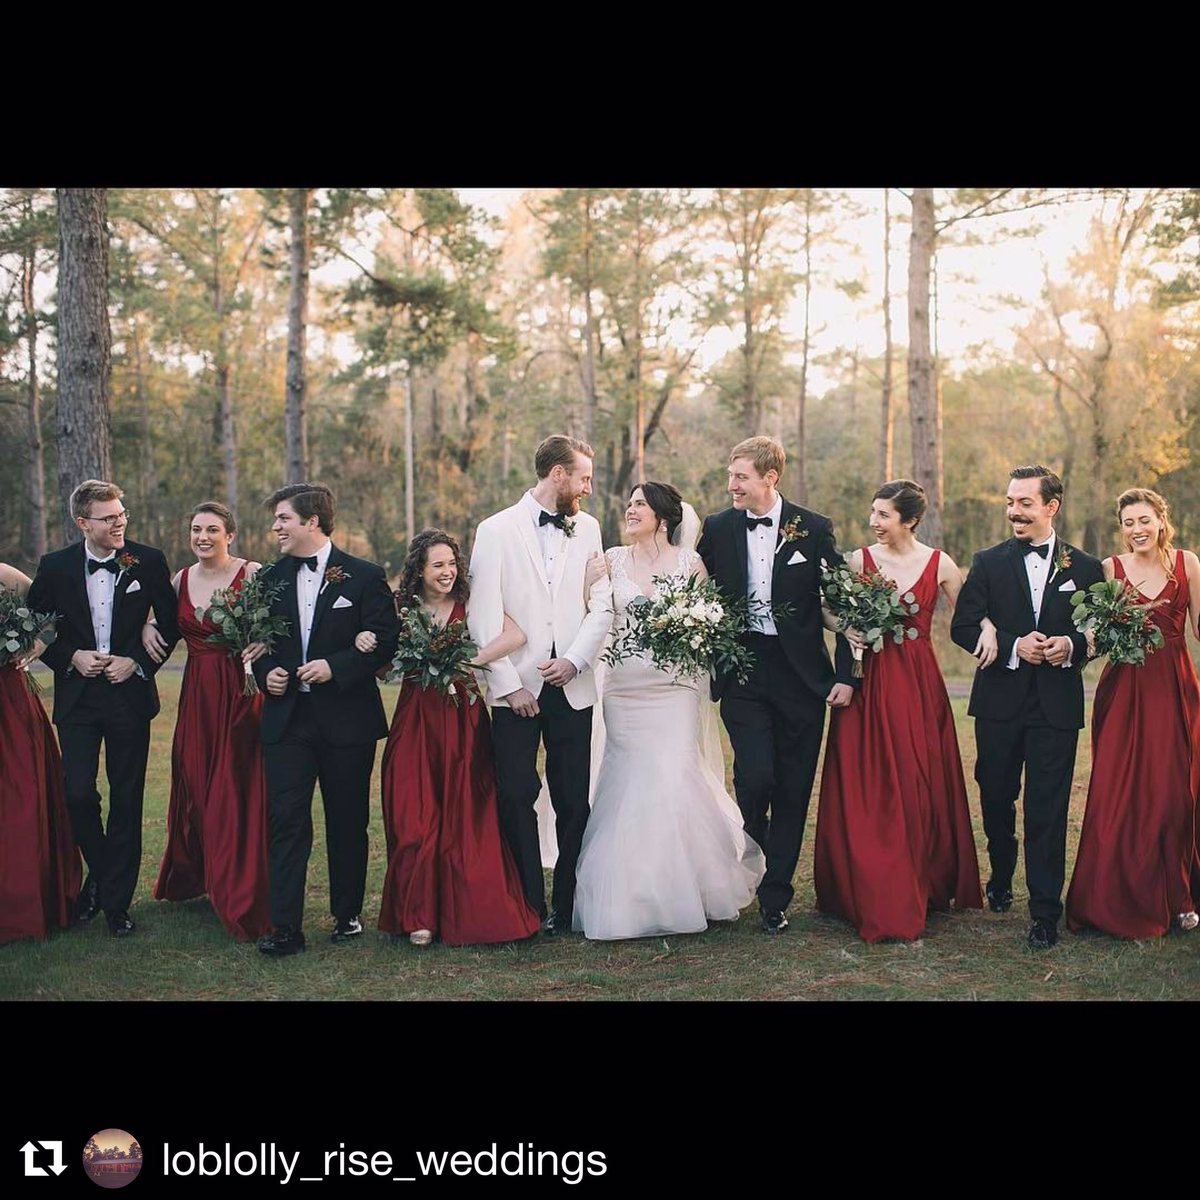 #Repost @loblolly_rise_weddings
・・・
Another beautiful shot at Loblolly Rise taken by Black and Hue Photography!  loblollyrise.com #tallahasseewedding #tallahassee #thomasvillega #loblollyriseplantation #loblollyrise #plantationwedding #barnwedding